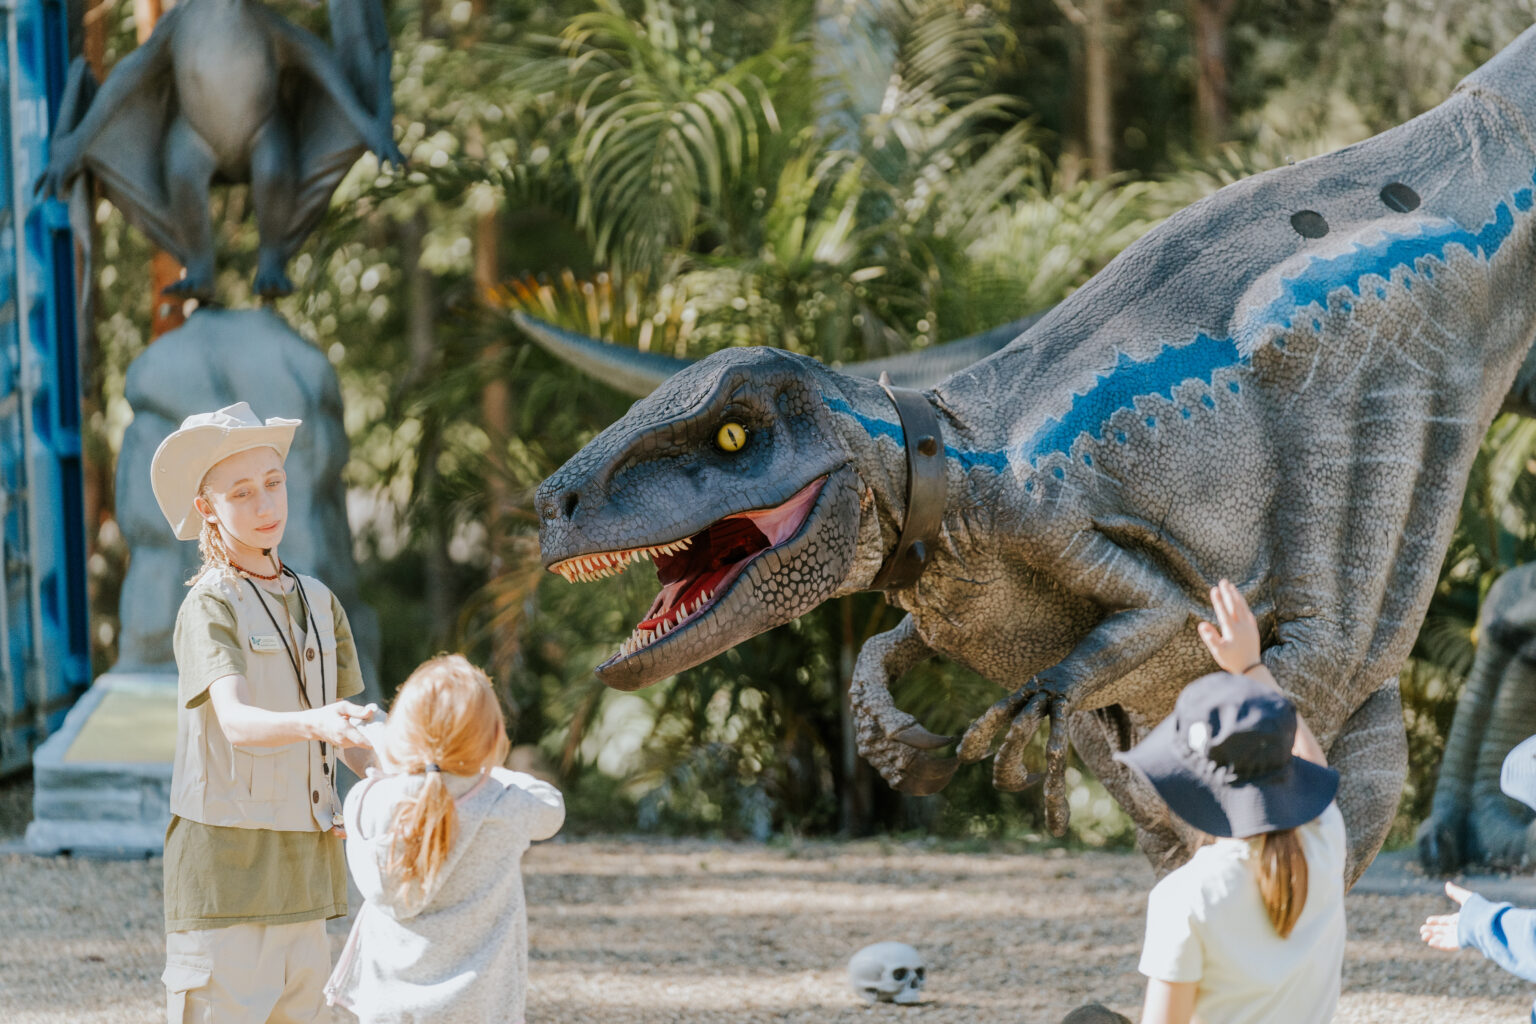 Get Up Close And Personal To The Life-Sized Dinosaurs